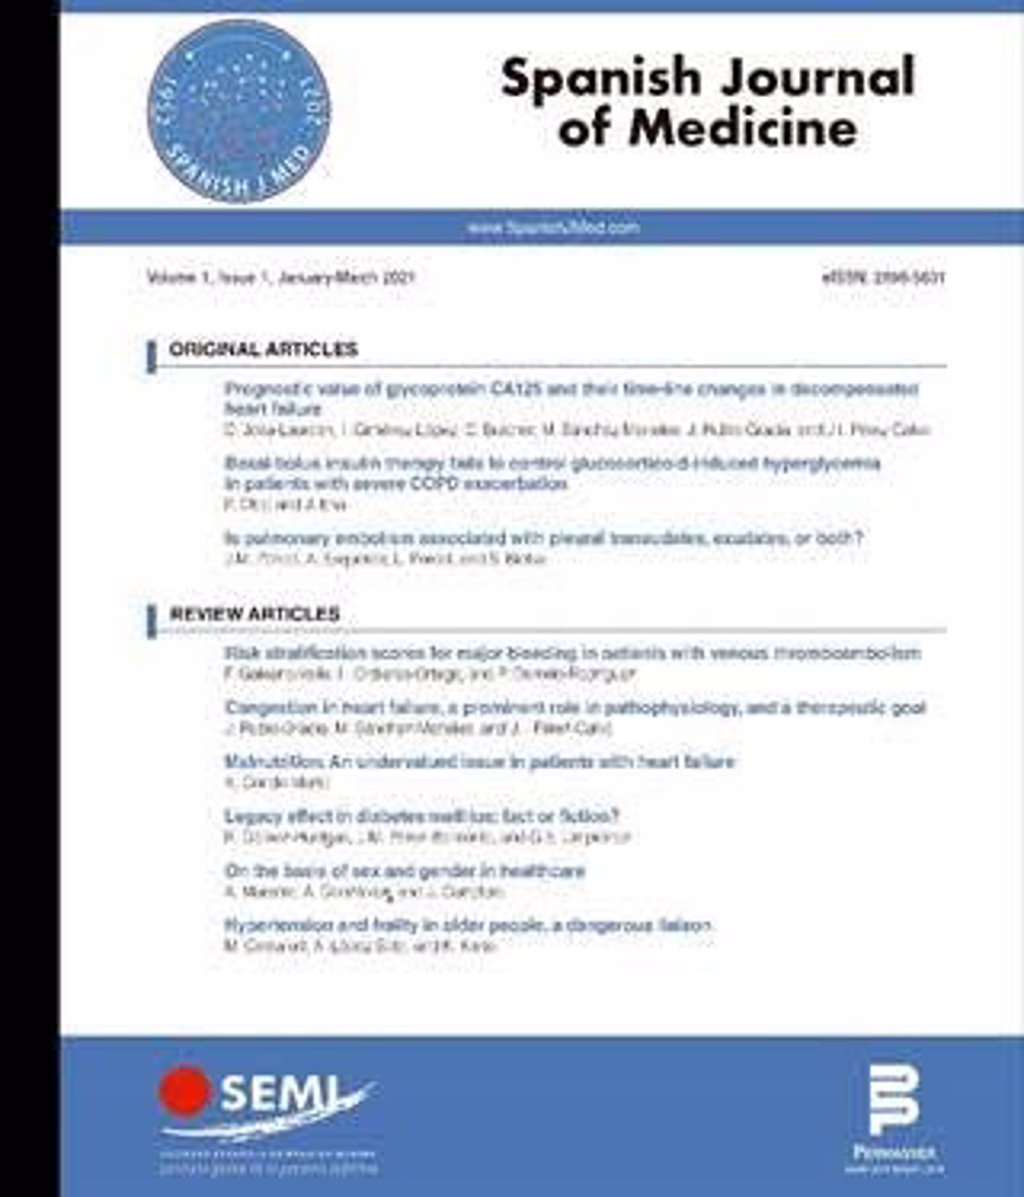 The SEMI launches the first issue of its new scientific journal ‘Spanish Journal of Medicine’